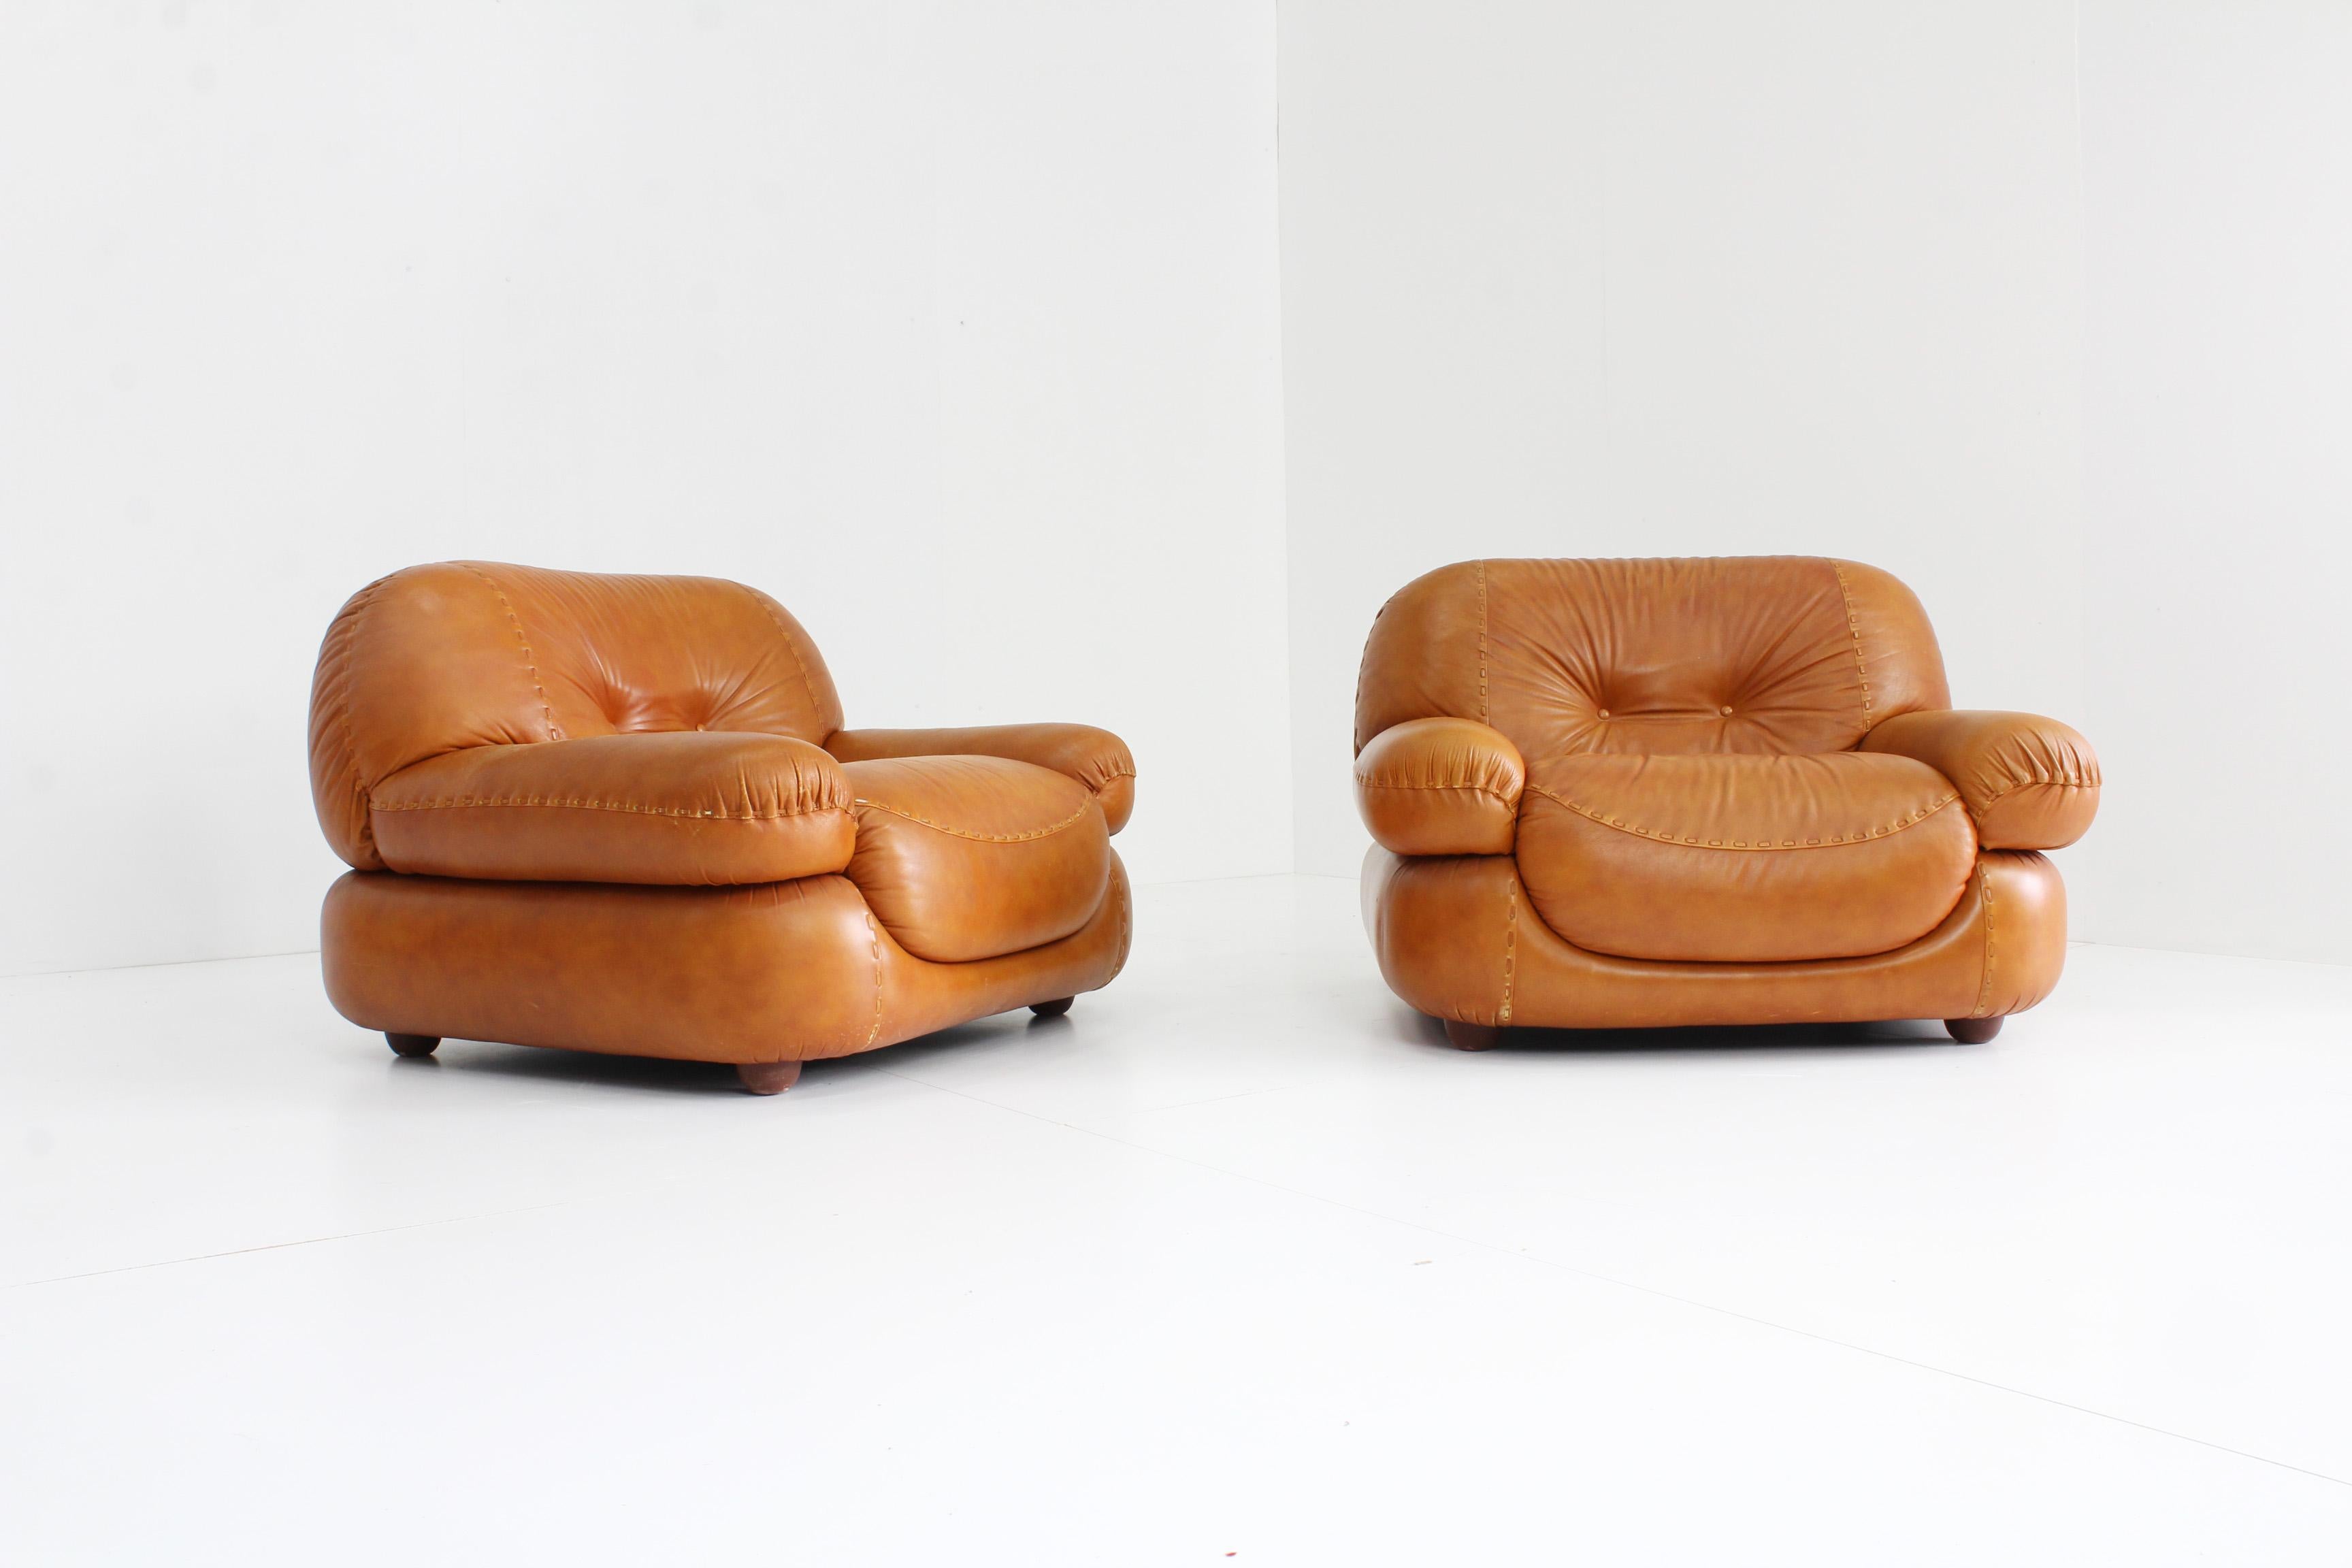 A set of 2 Italian Sapporo lounge chairs in cognac leather designed by Sapporo for Mobil Girgi in the 1970s. The chairs are extremly comfortable and well designed, high quality italian design. Original cognac leather upholstery, beautiful patina.